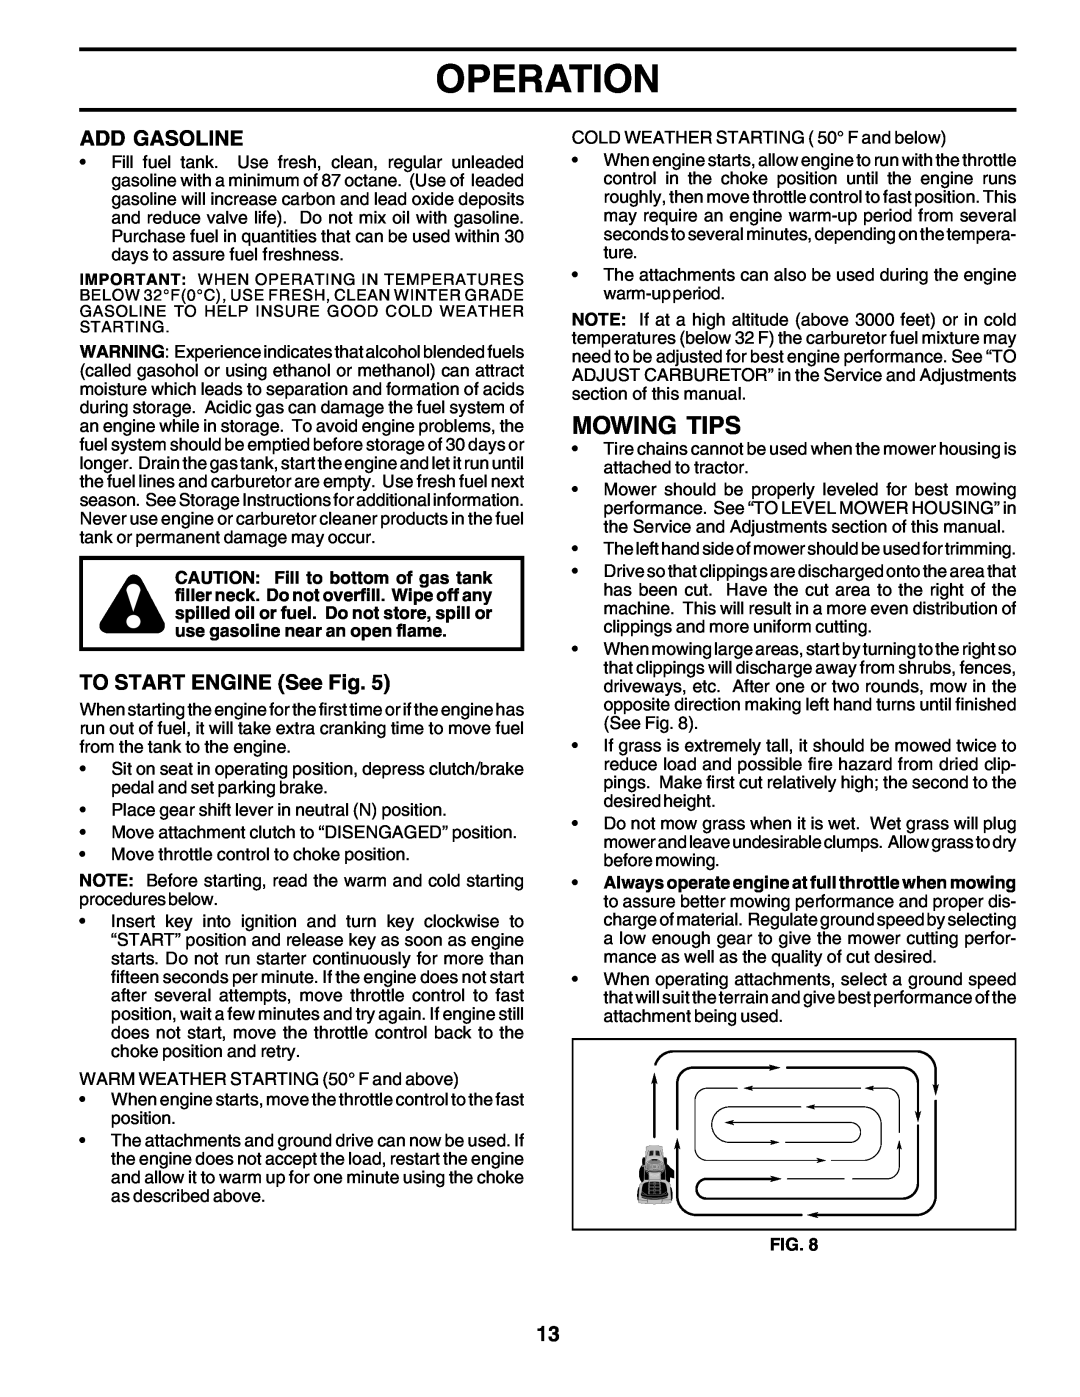 Poulan PC14542D owner manual Mowing Tips, Operation, Add Gasoline, TO START ENGINE See Fig 